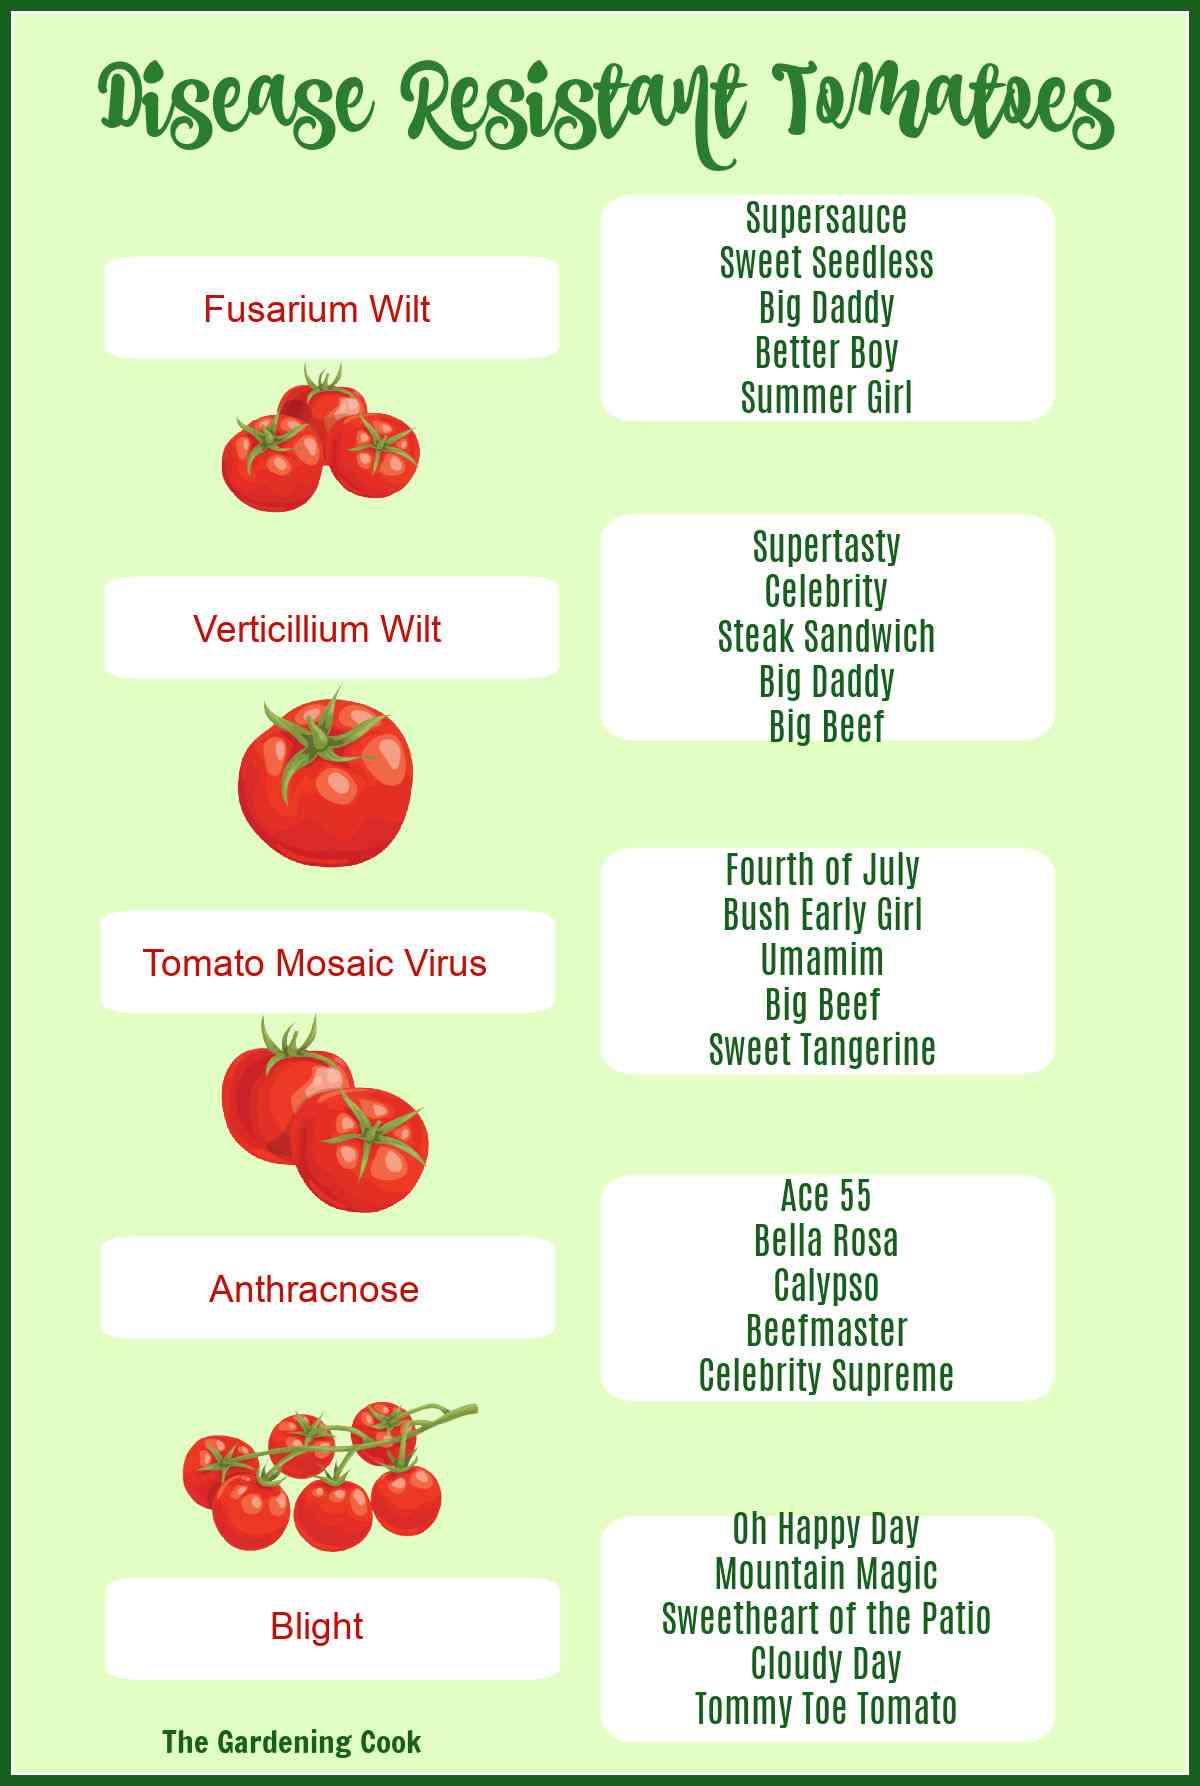 Varieties of tomatoes resistant to common tomato diseases.